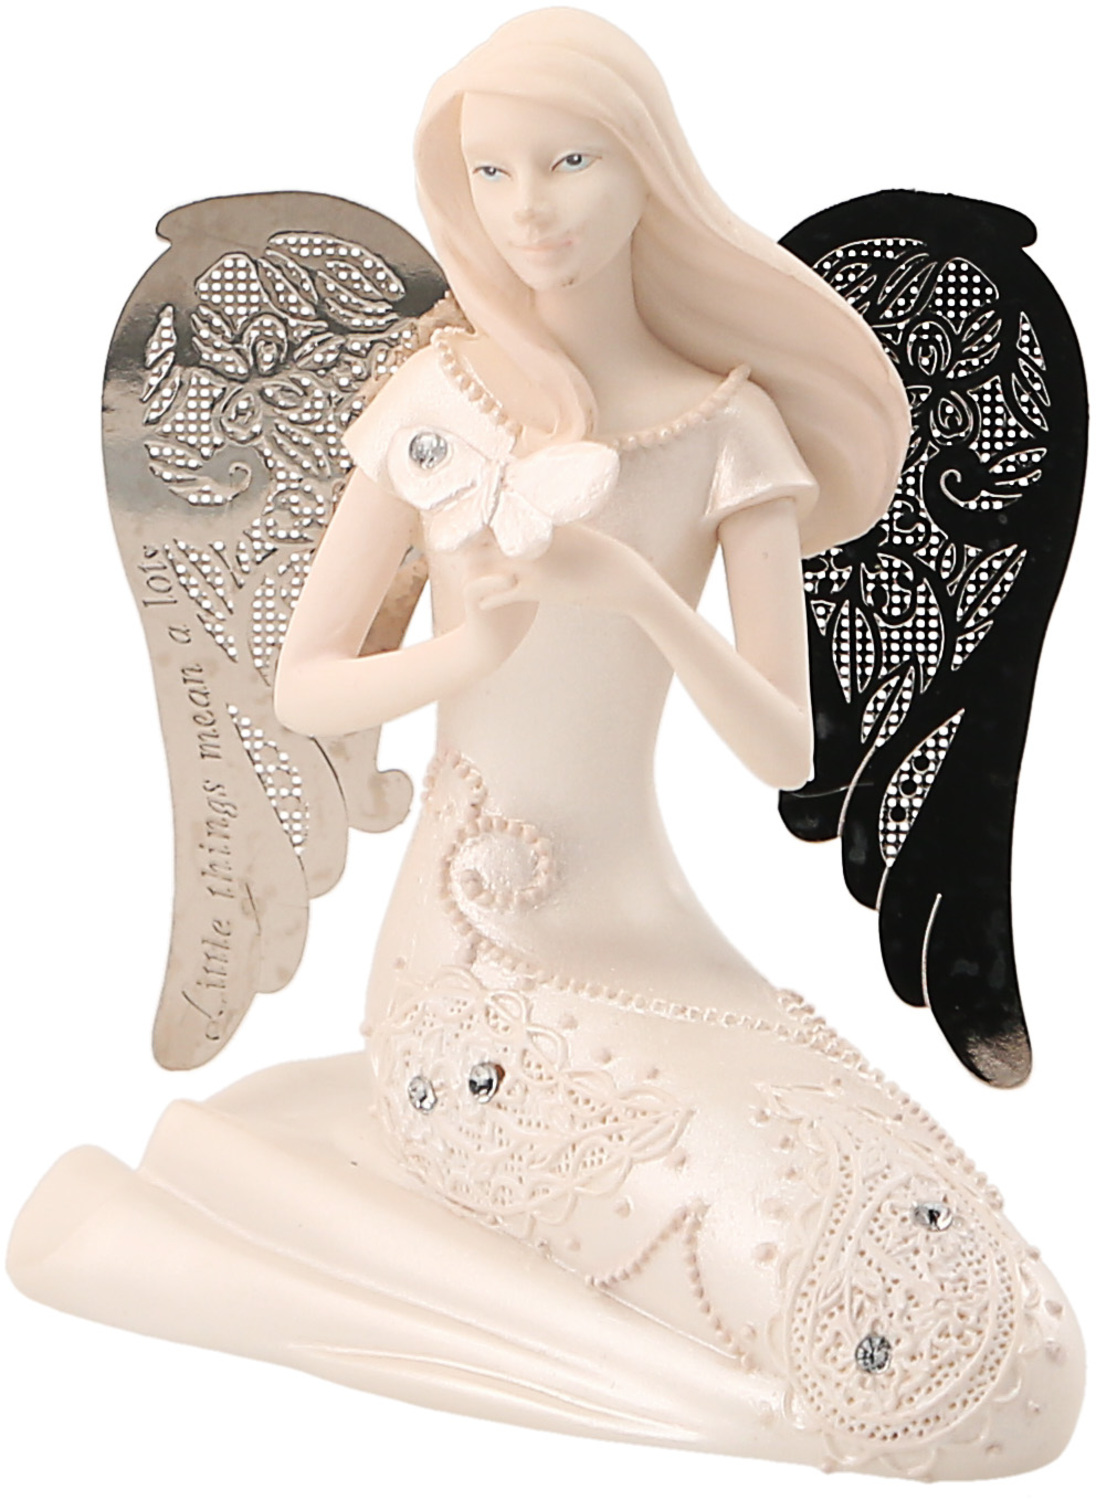 April Birthstone Angel by Little Things Mean A Lot - April Birthstone Angel - 3.5" April Angel with Diamond Butterfly